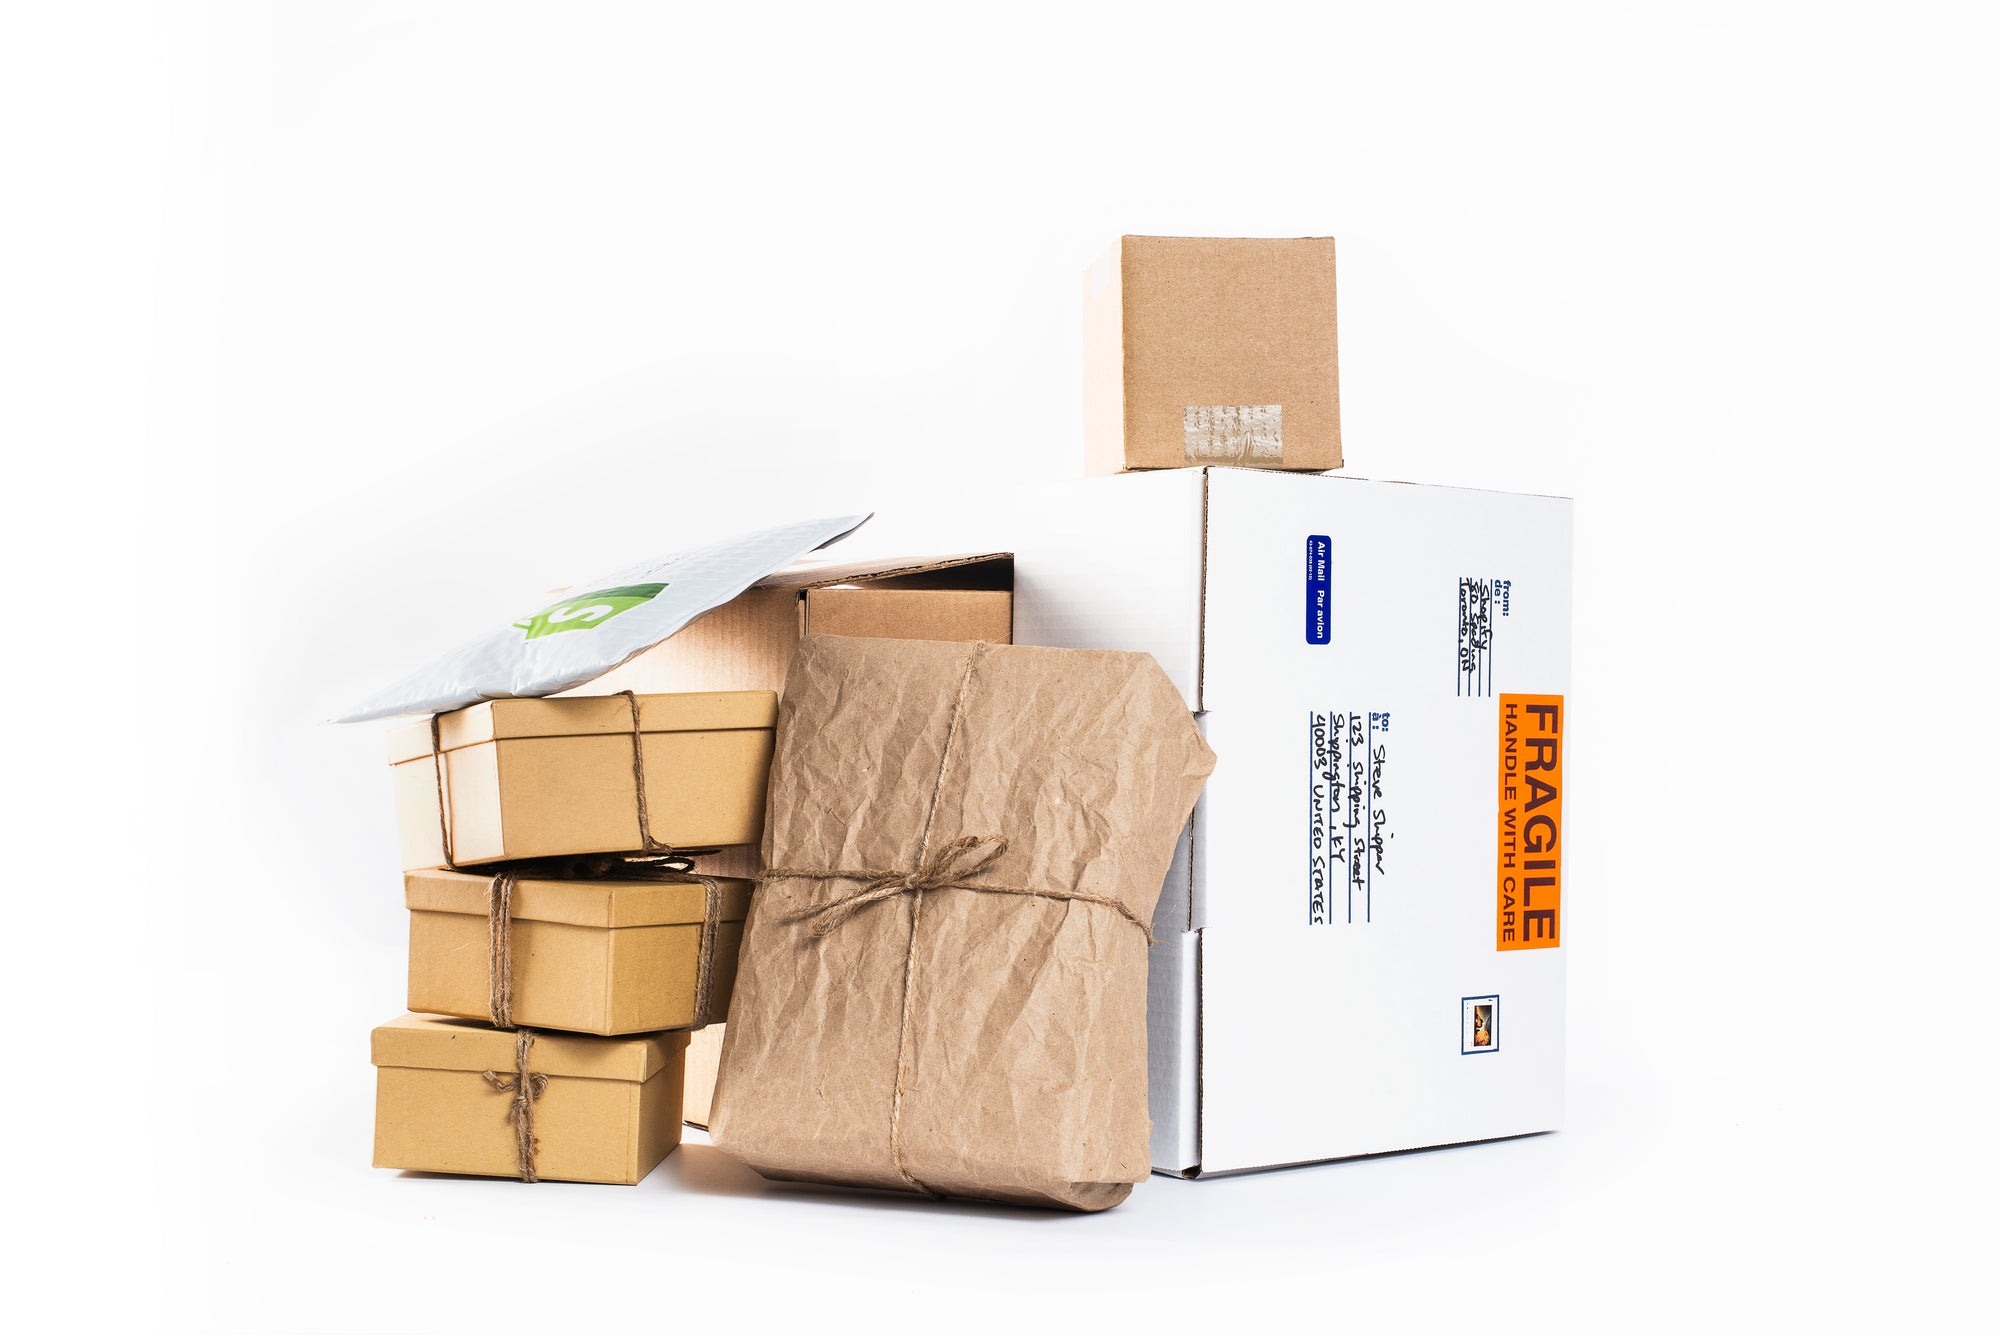 Boxes, packages and items representing Nature's Branch shipping deliveries